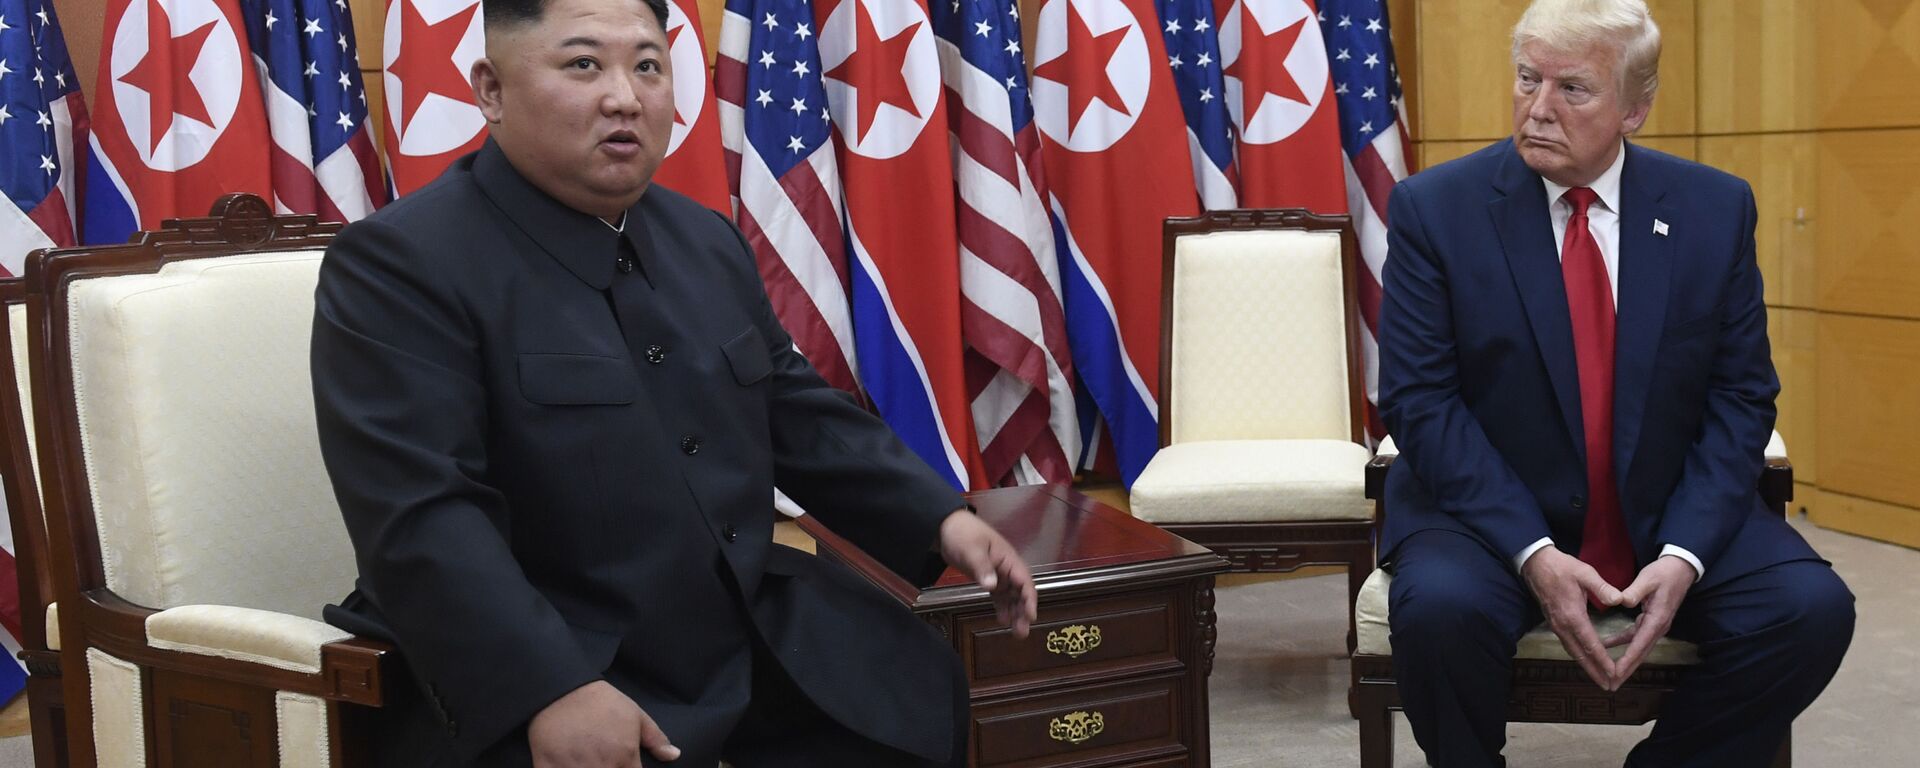  In this June 30, 2019, file photo President Donald Trump, right, listens as North Korean leader Kim Jong Un, left, speaks during their bilateral meeting inside the Freedom House at the border village of Panmunjom in the Demilitarized Zone, South Korea - Sputnik International, 1920, 18.09.2021